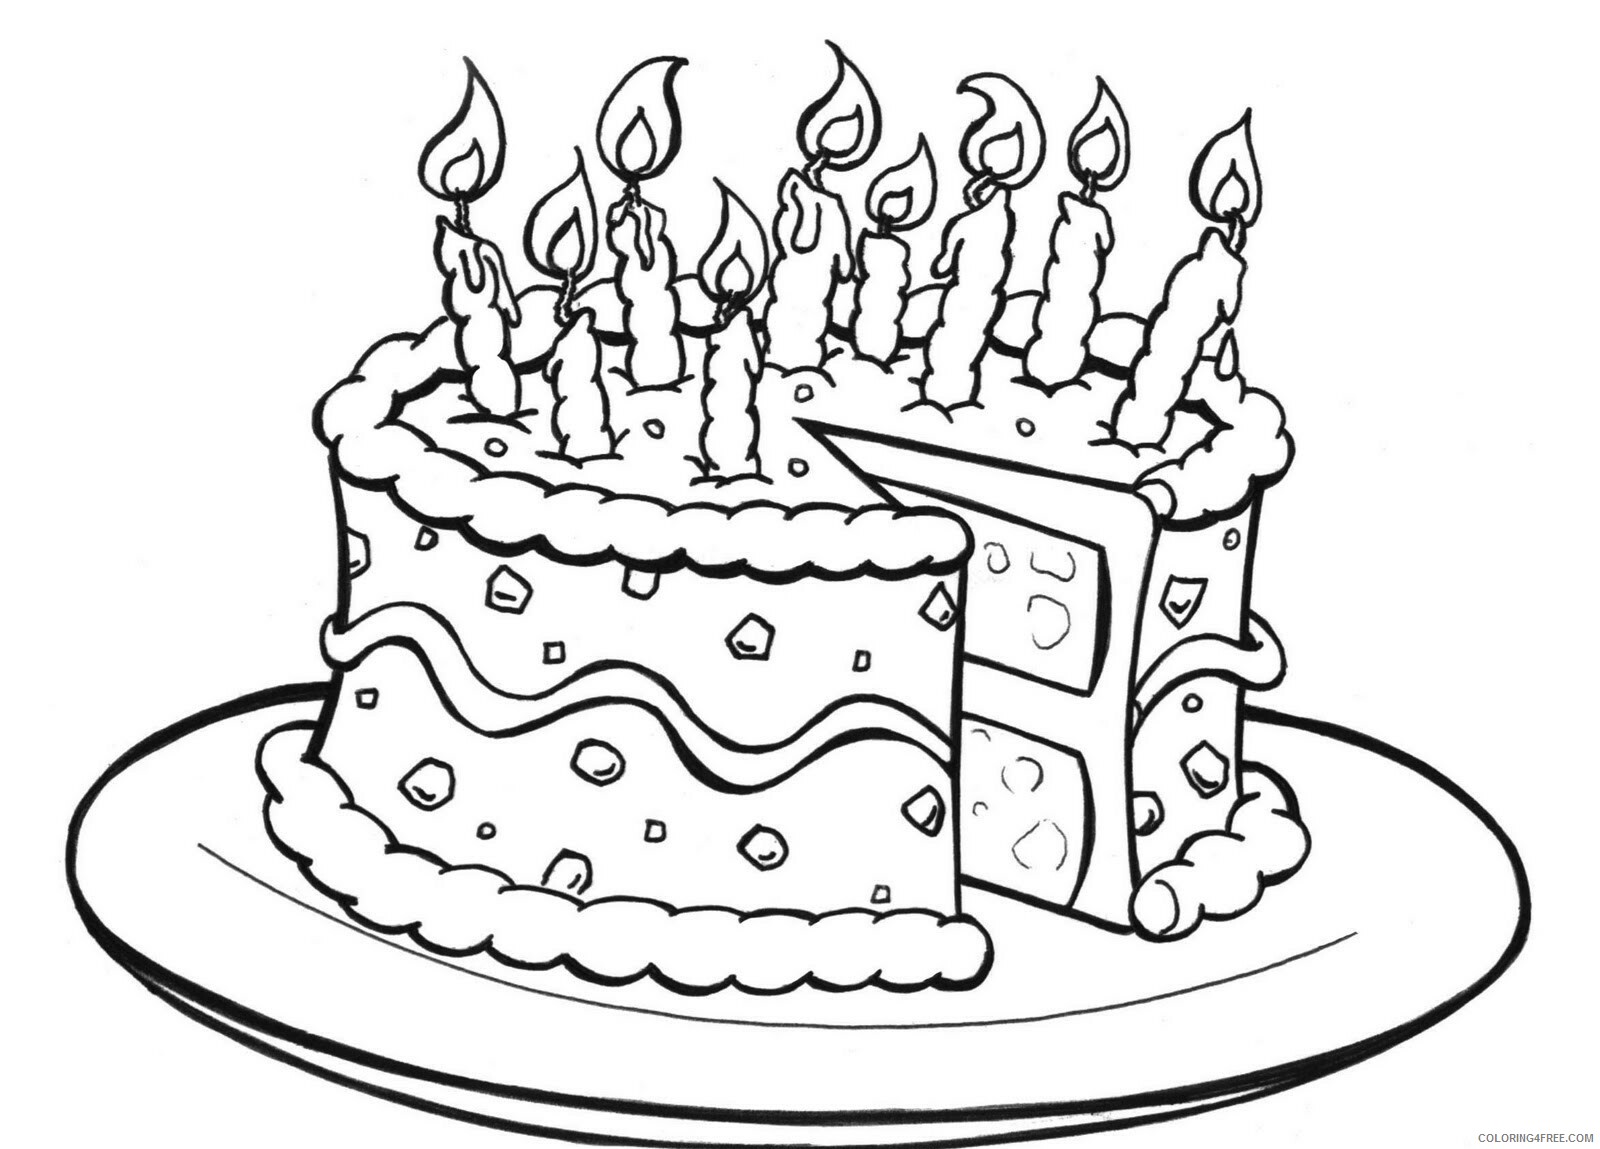 Birthday Cake Coloring Pages Food Birthday Cake Printable 2021 005 Coloring4free